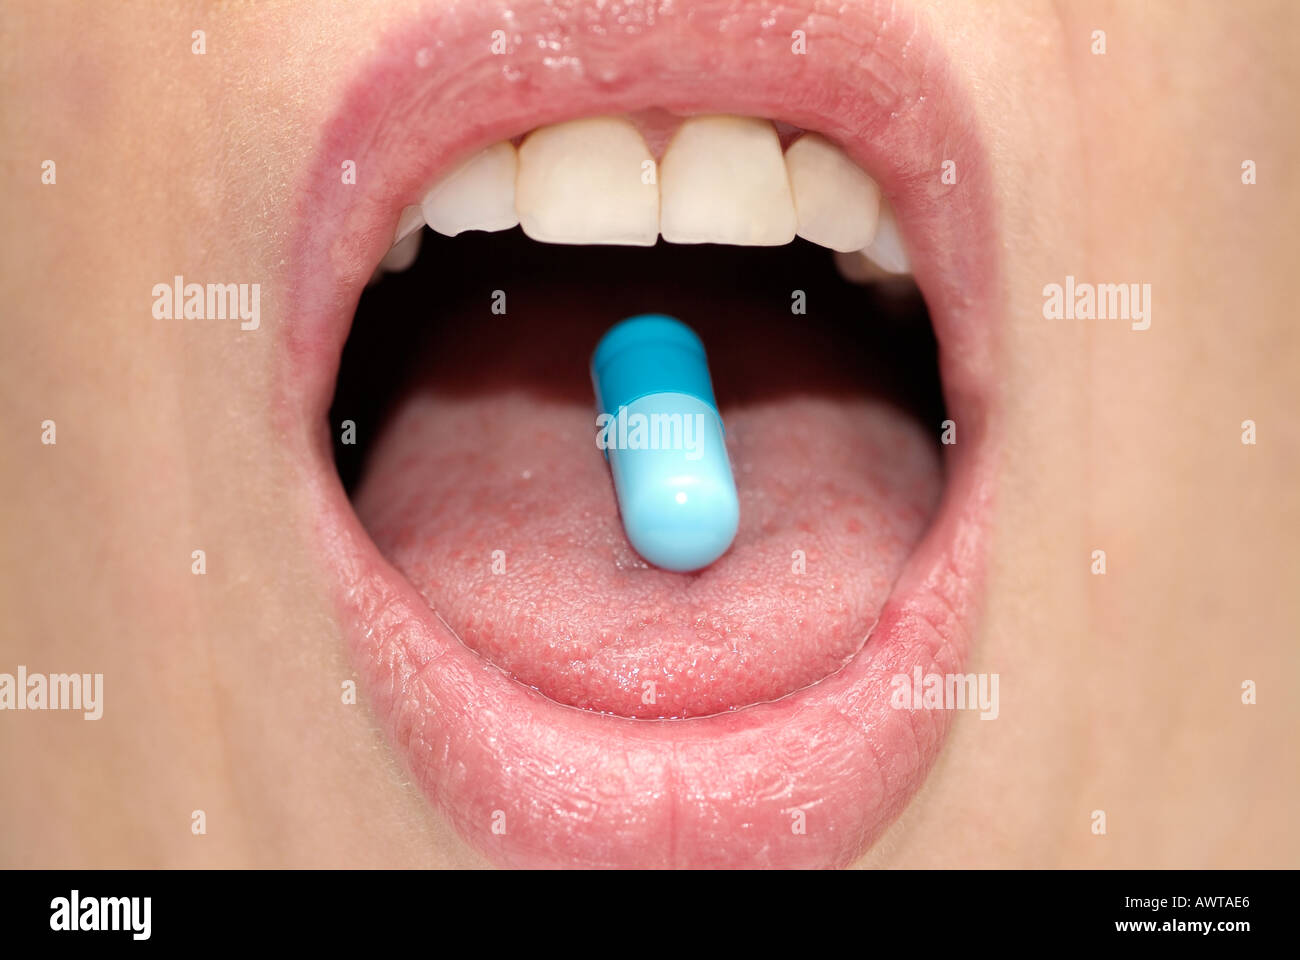 Females Mouth with a Capsule on the Tongue, Close Up. Stock Photo